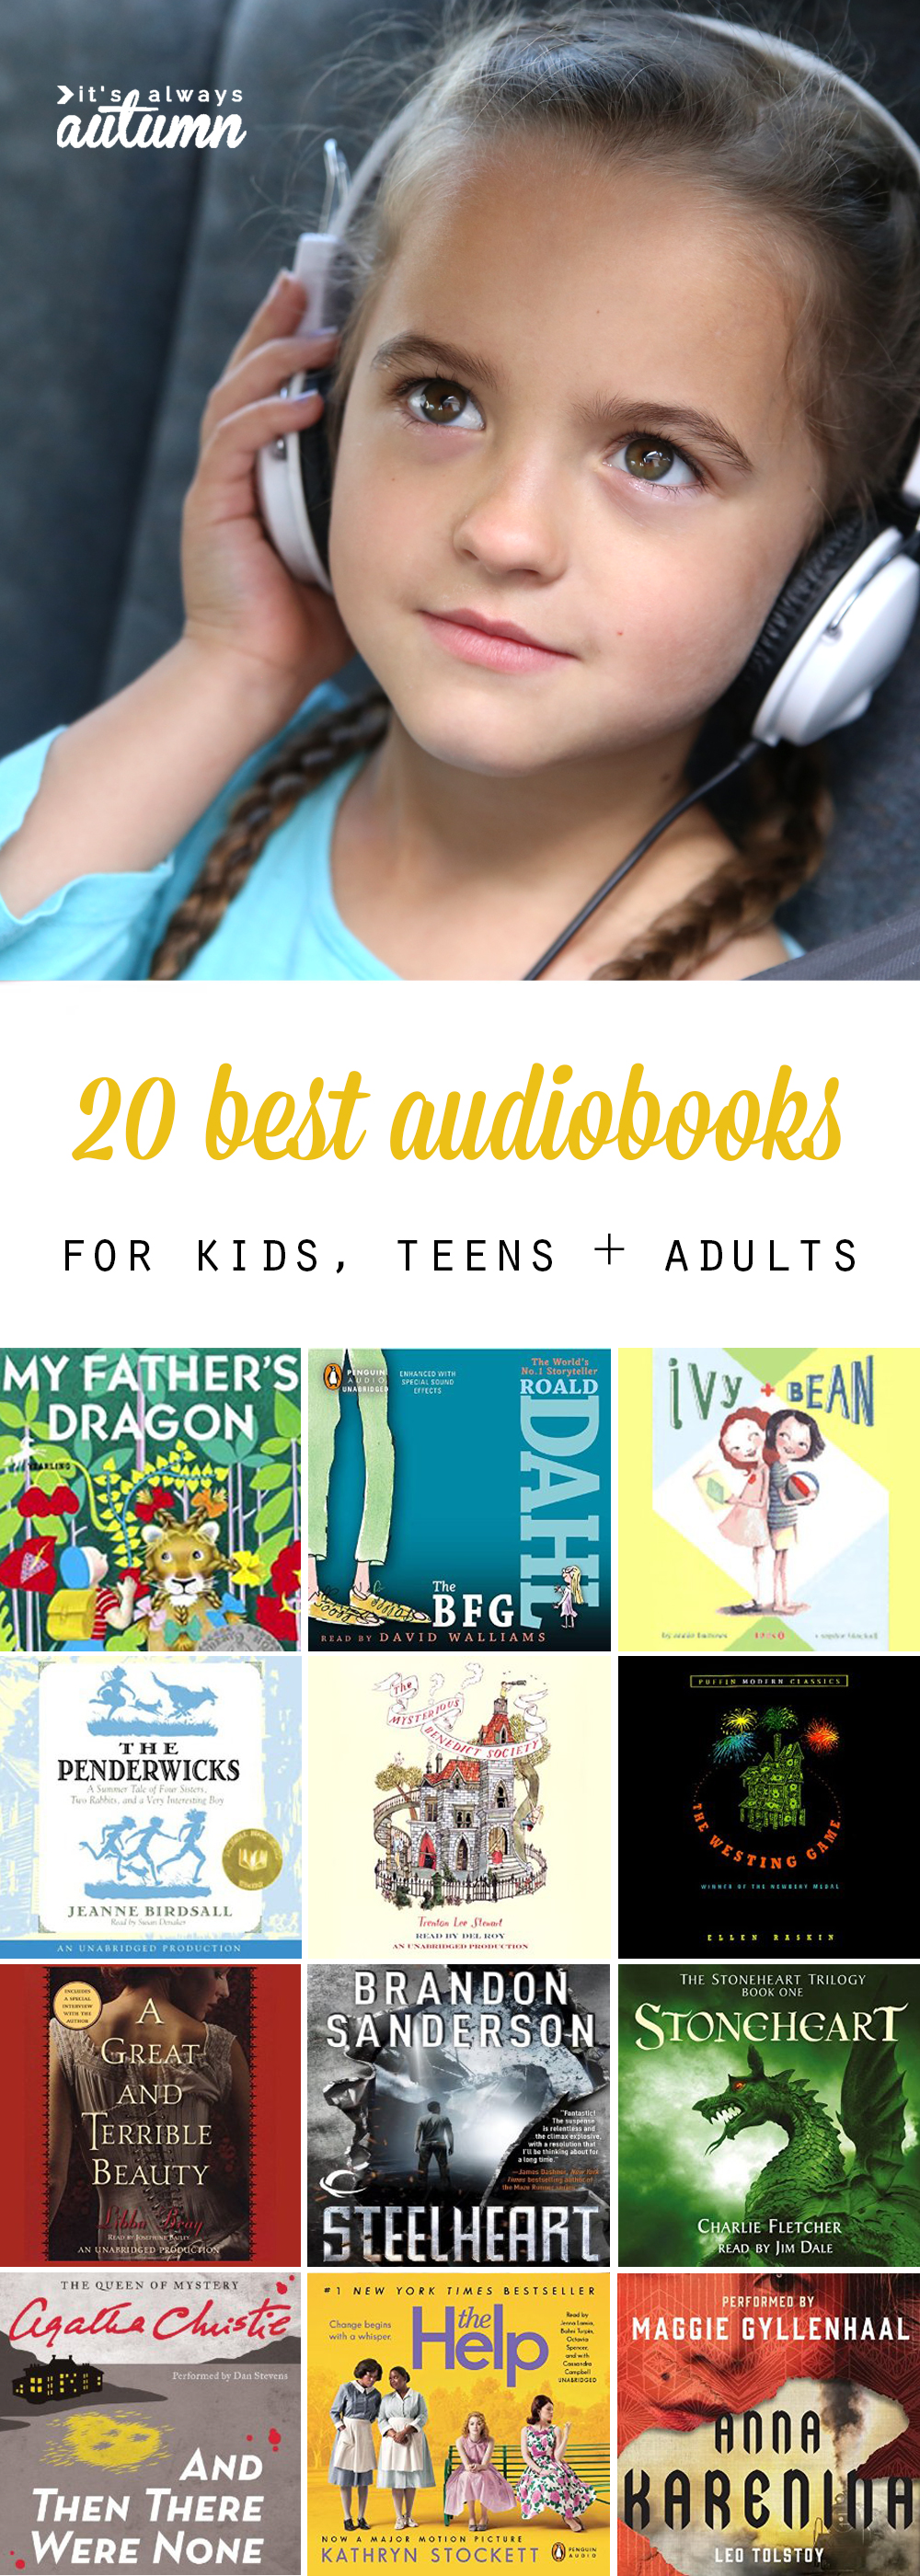 girl in a car with headphones on; collage of book covers